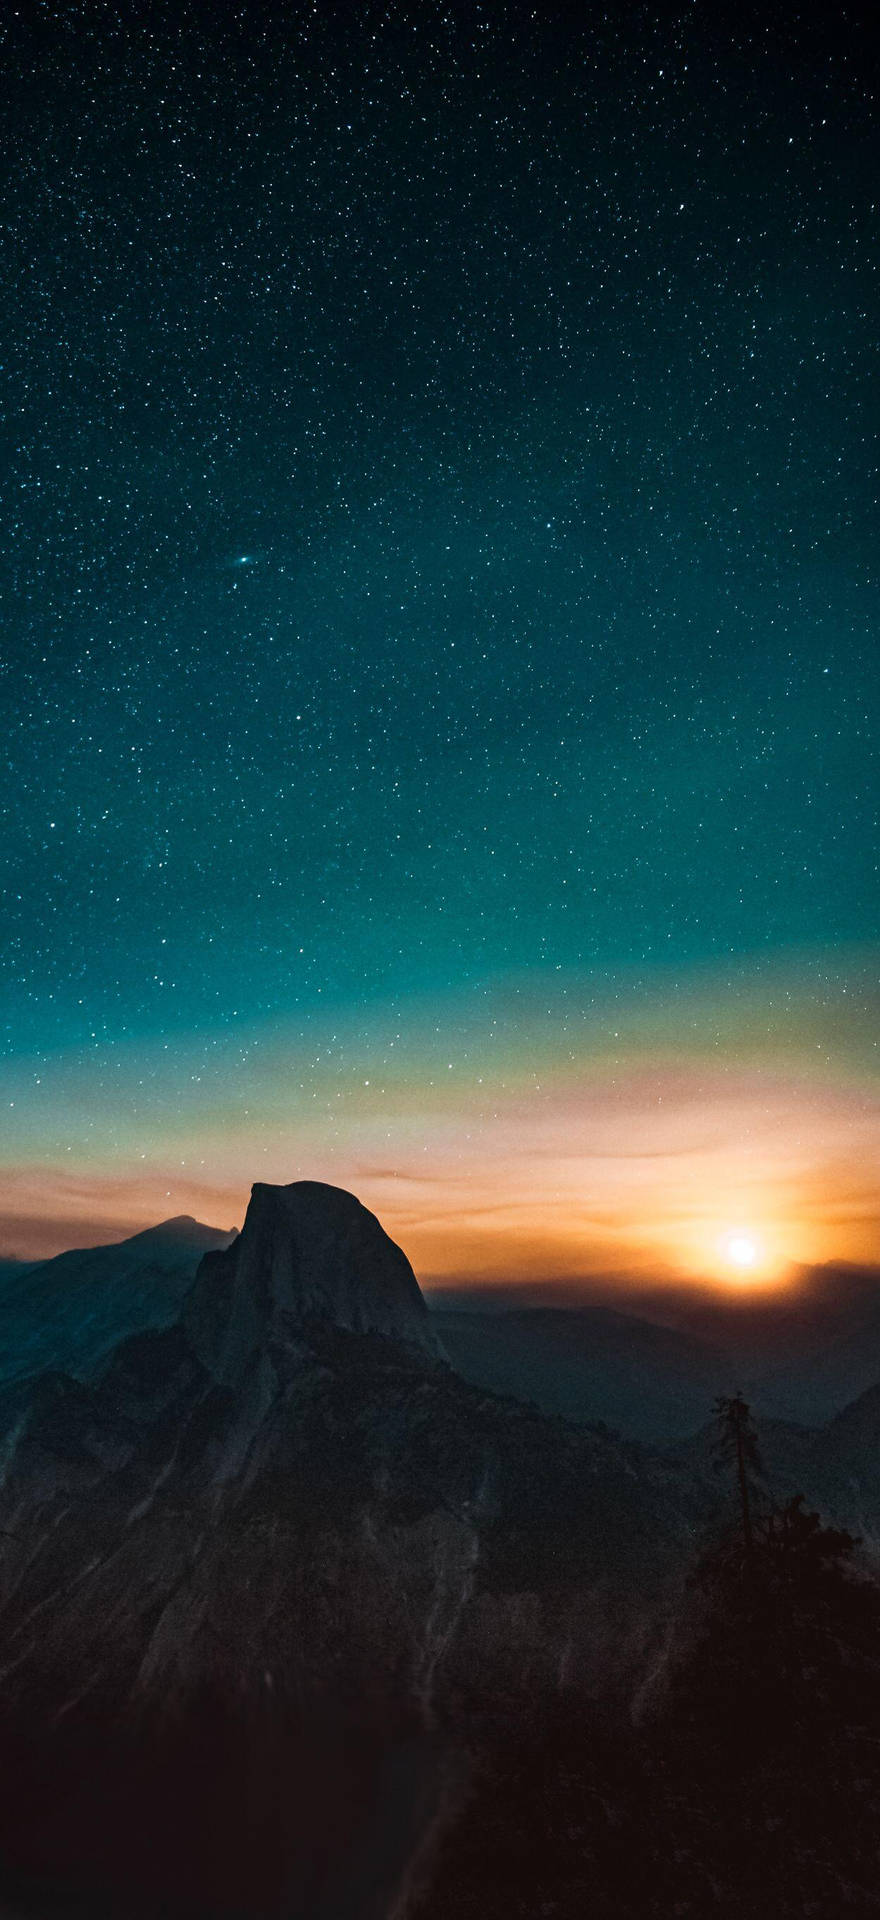 Cool Iphone Xs Max Starry Mountain Background